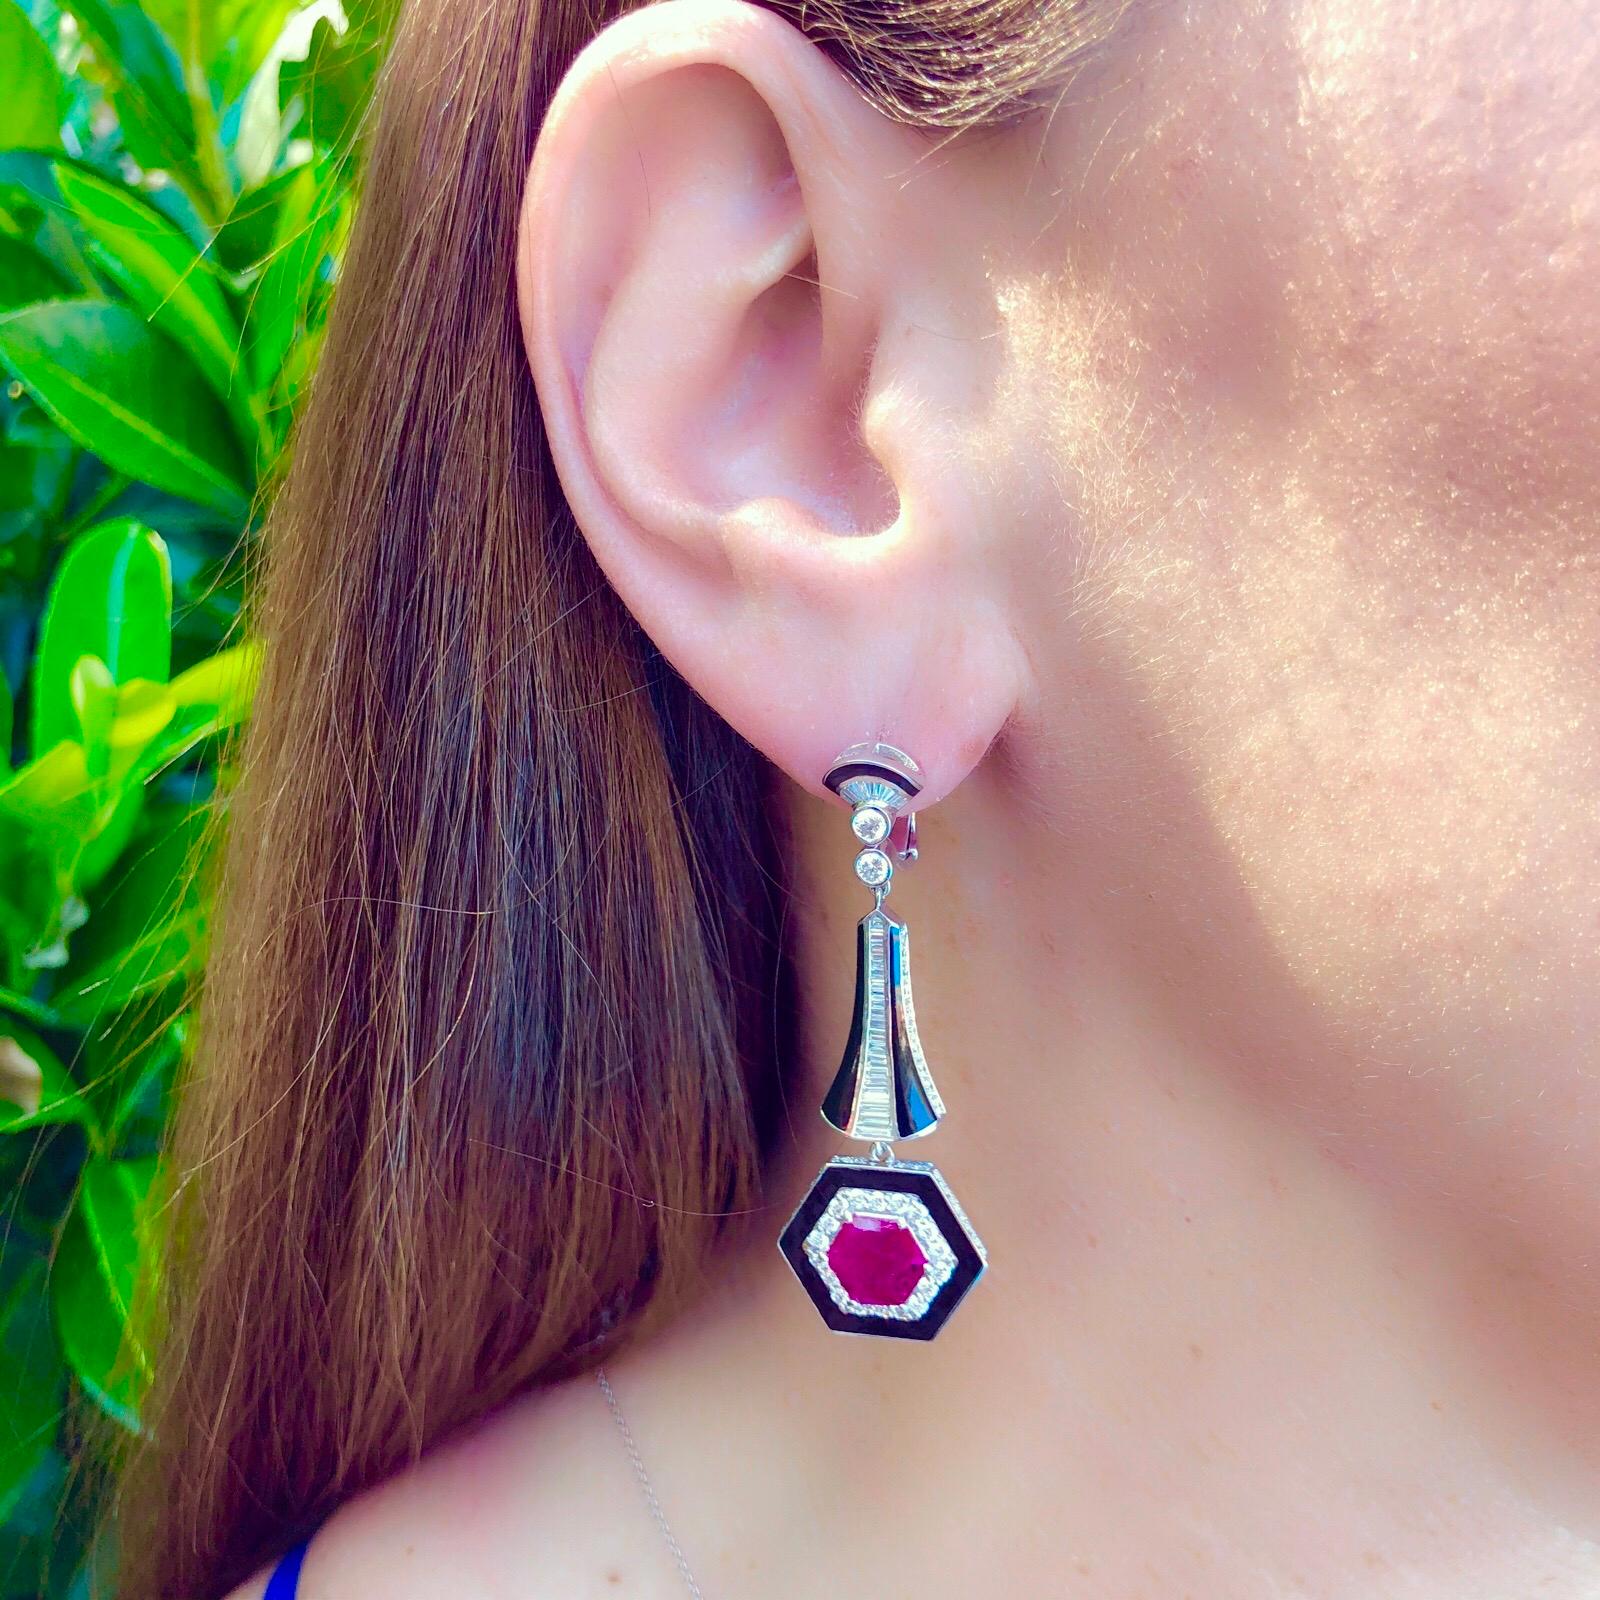 This striking pair of earrings by Italian designer Salavetti are a unique find! The 18k white gold drop earrings feature two hexagonal cut vibrant red rubies, together weighing 2.96 carats, then set front, side and reverse with 250 round brilliant